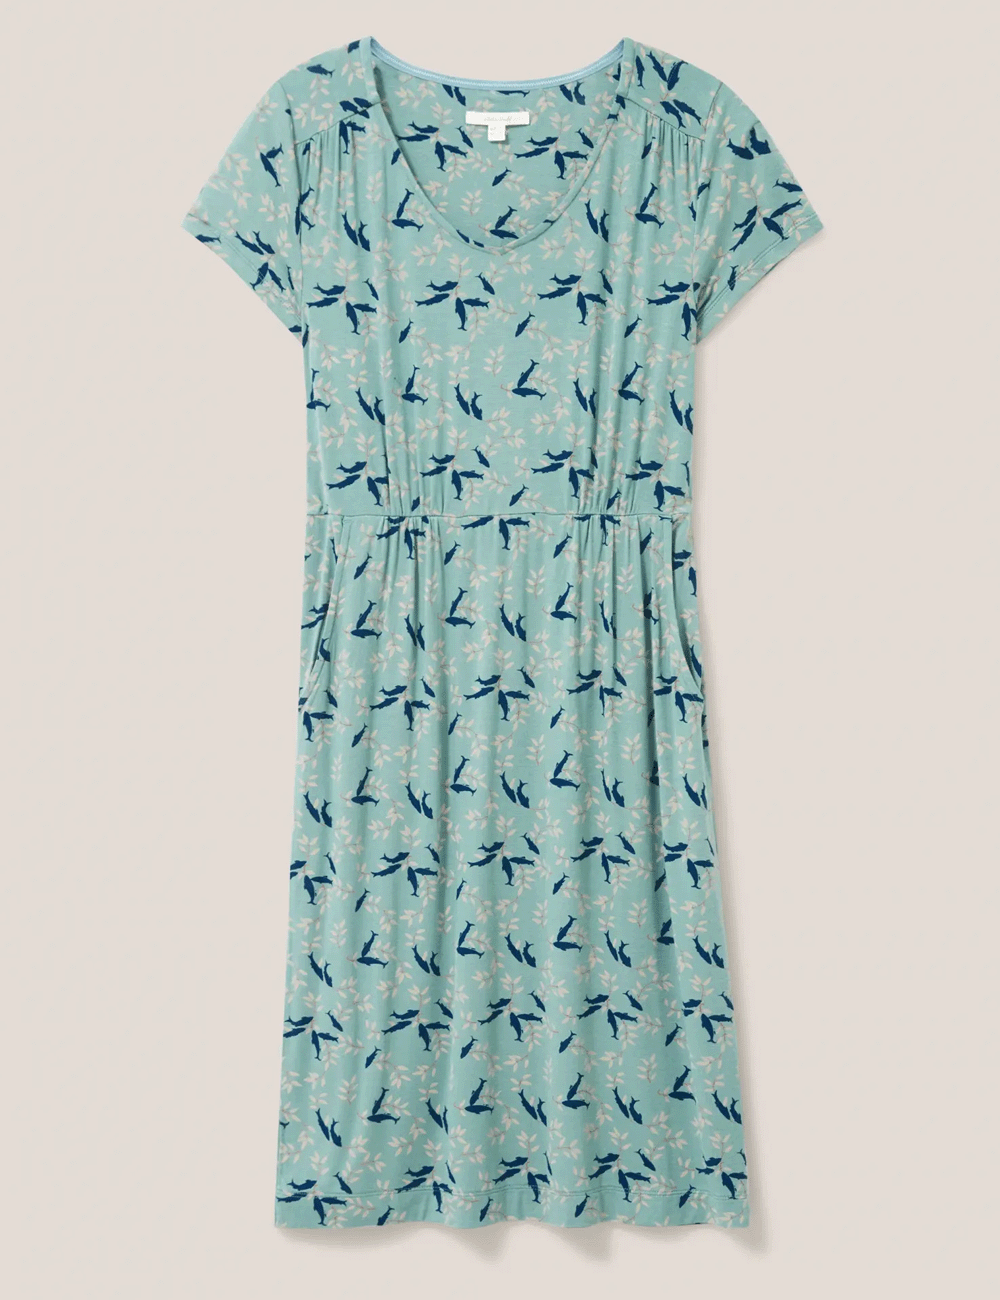 White Stuff's Tallie Jersey Dress in Green Multi on a grey background